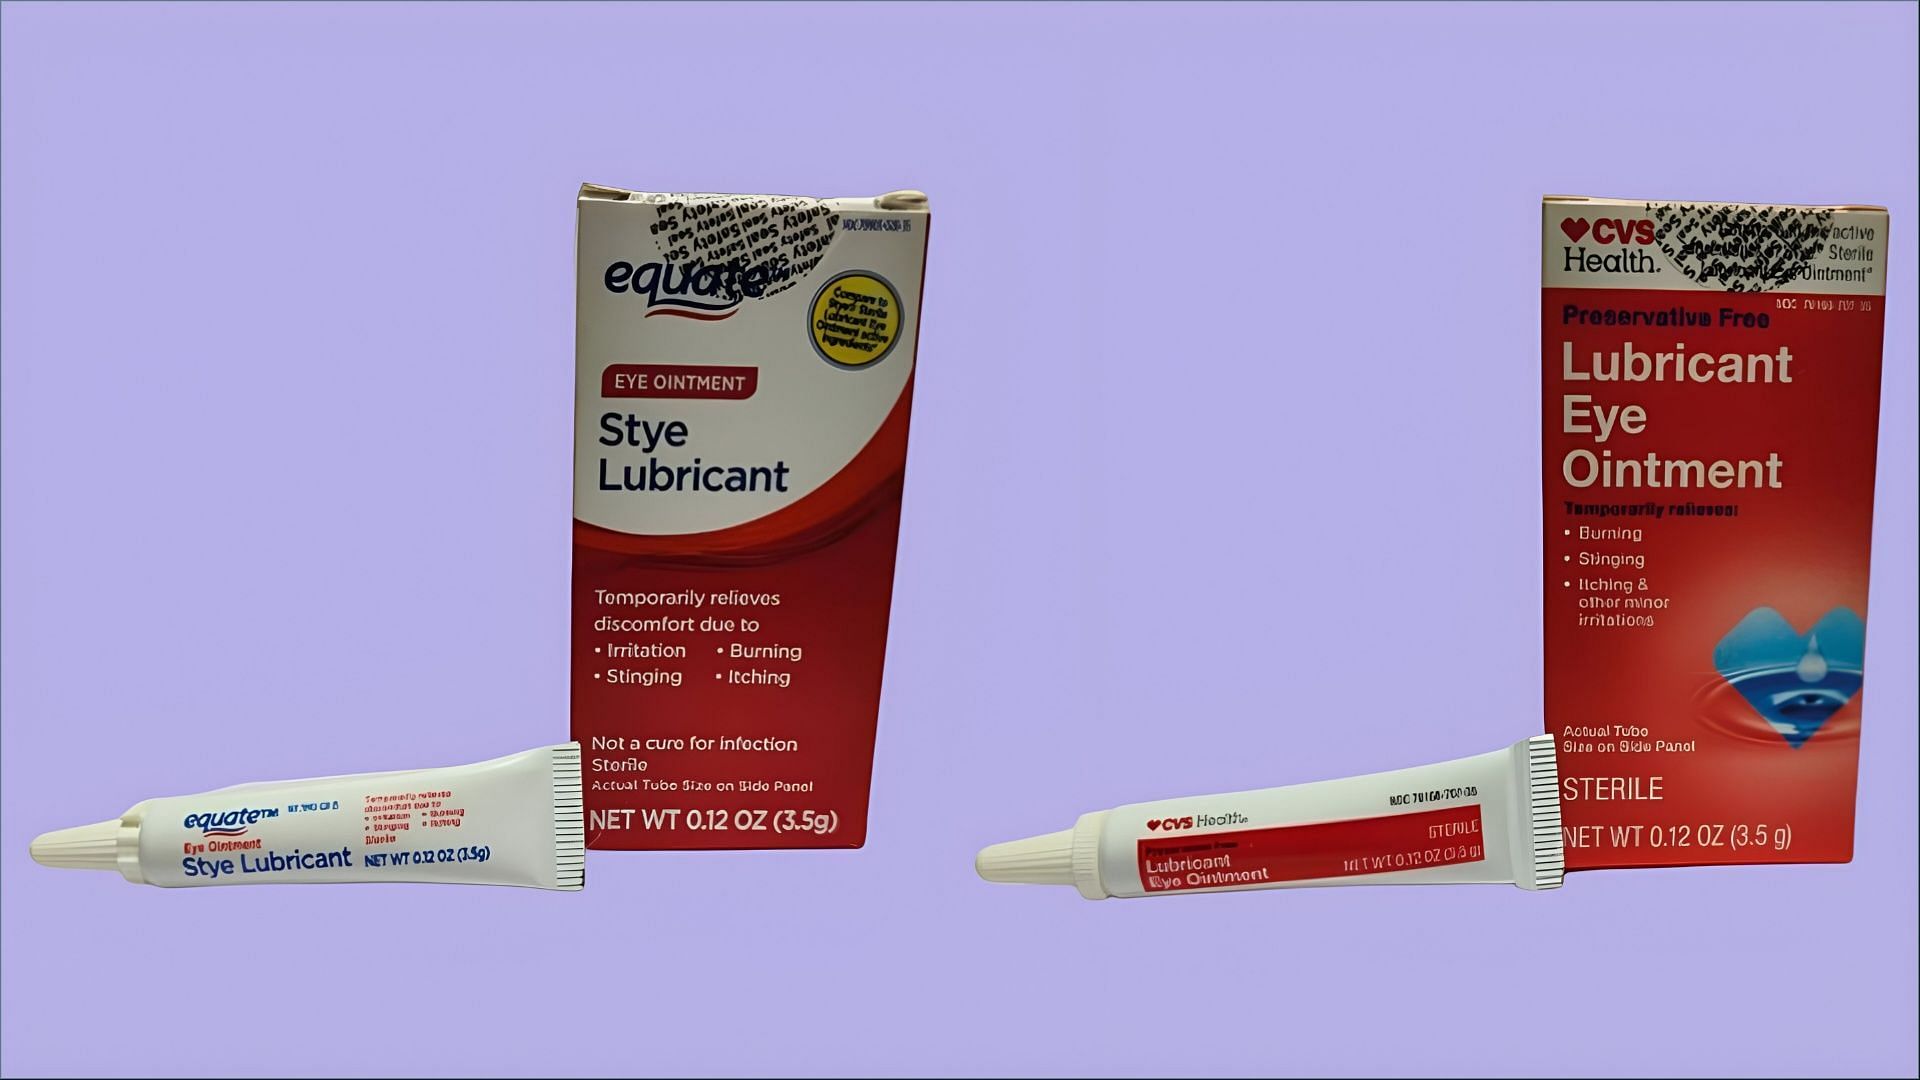 The affected eye ointments may pose risks of causing severe eye infections (Image via FDA)